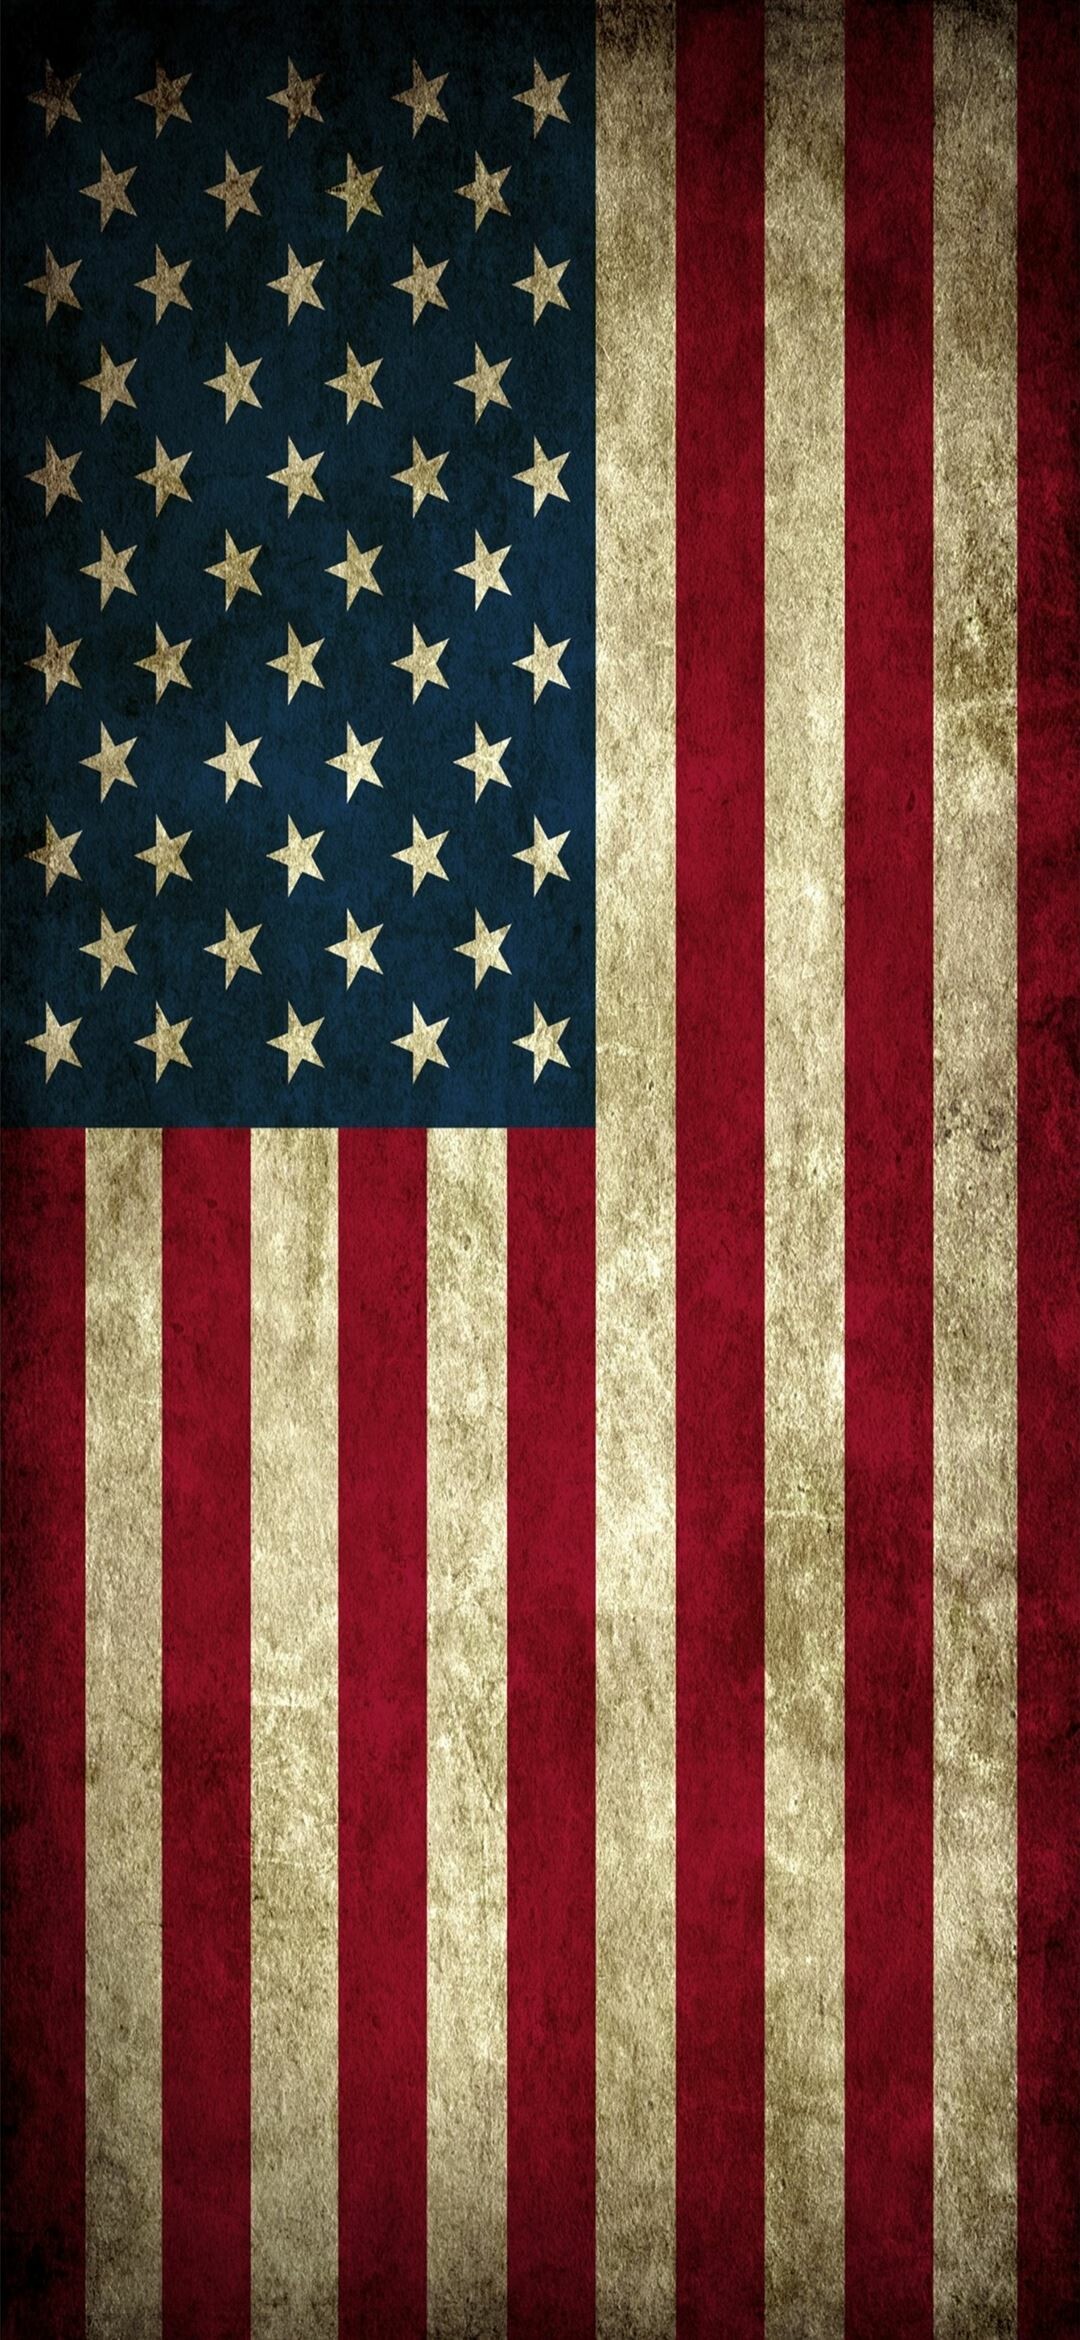 Independence Day (USA): Old Glory, 50 stars representing the 50 states and there are 13 stripes Representing the 13 original colonies. 1080x2340 HD Background.